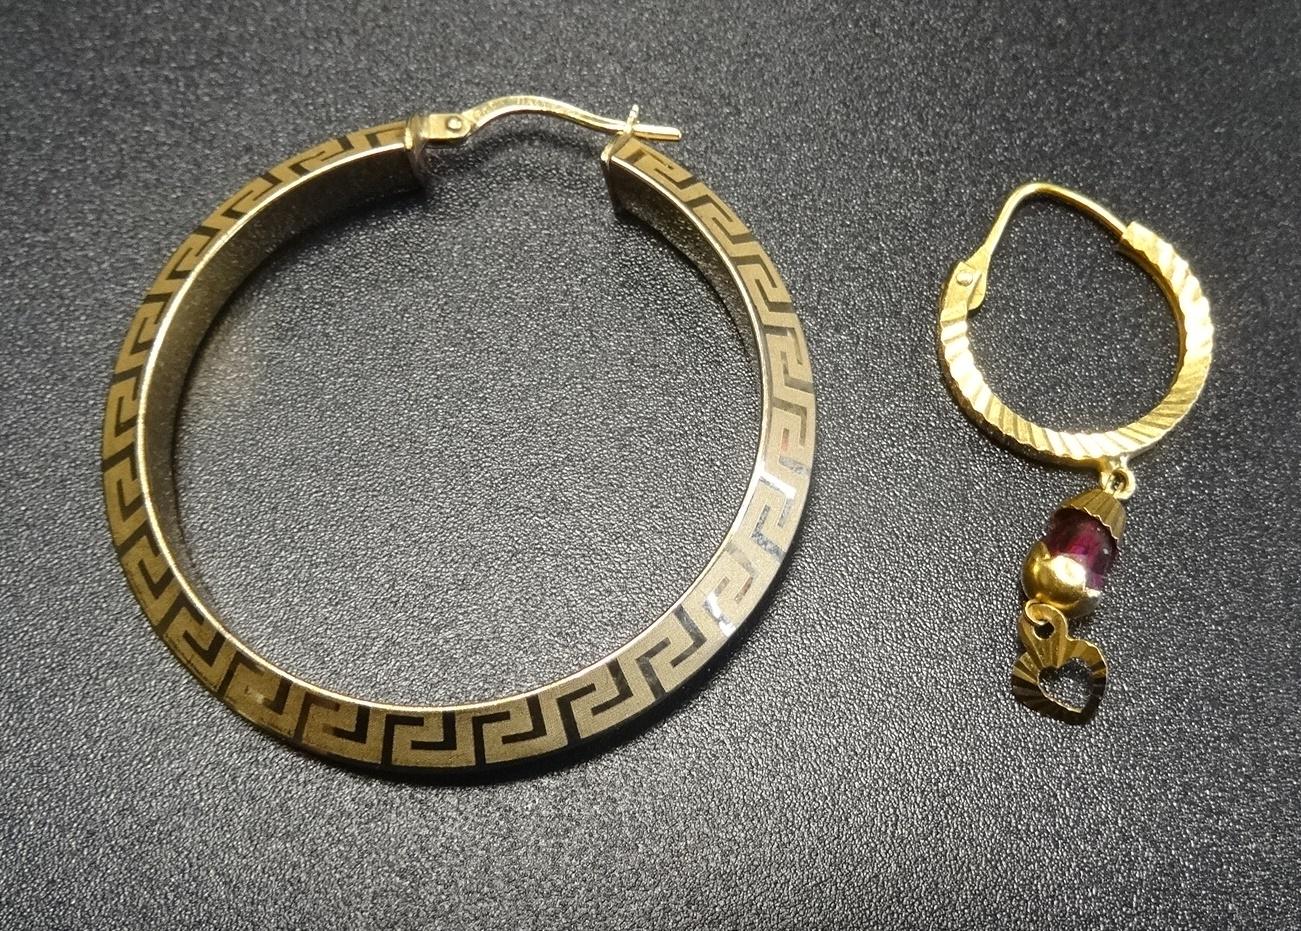 SINGLE TWENTY-ONE CARAT GOLD EARRING set with a ruby (1 gram) and a single nine carat gold hoop